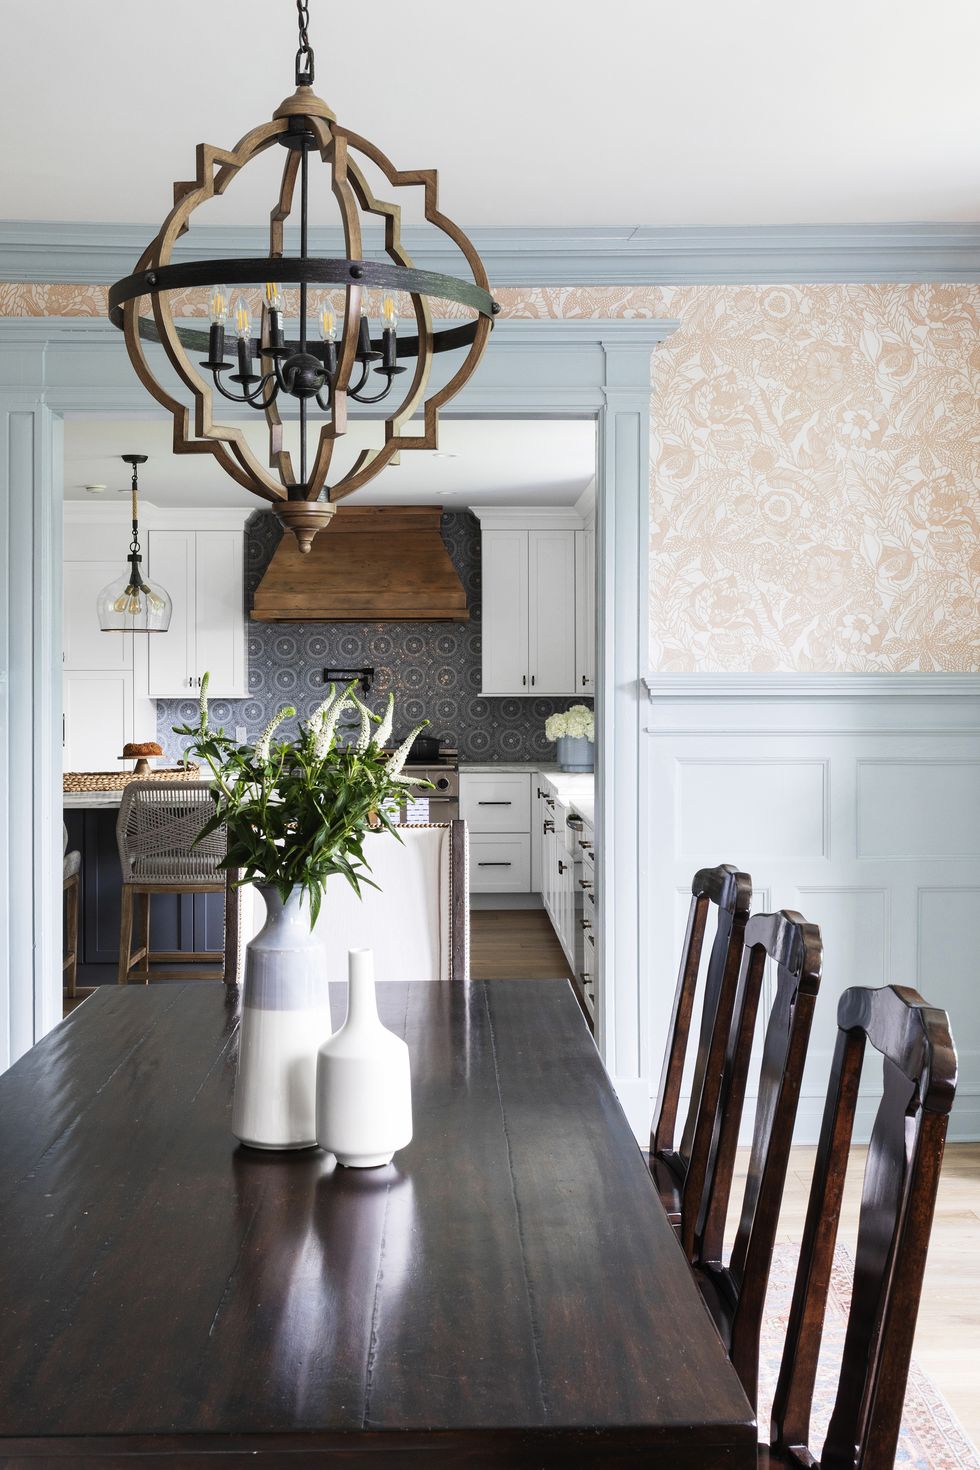 home featuring warm neutrals and soothing blue hues to accent the beautiful architecture of the vintage home interior designer karen b wolf dining room